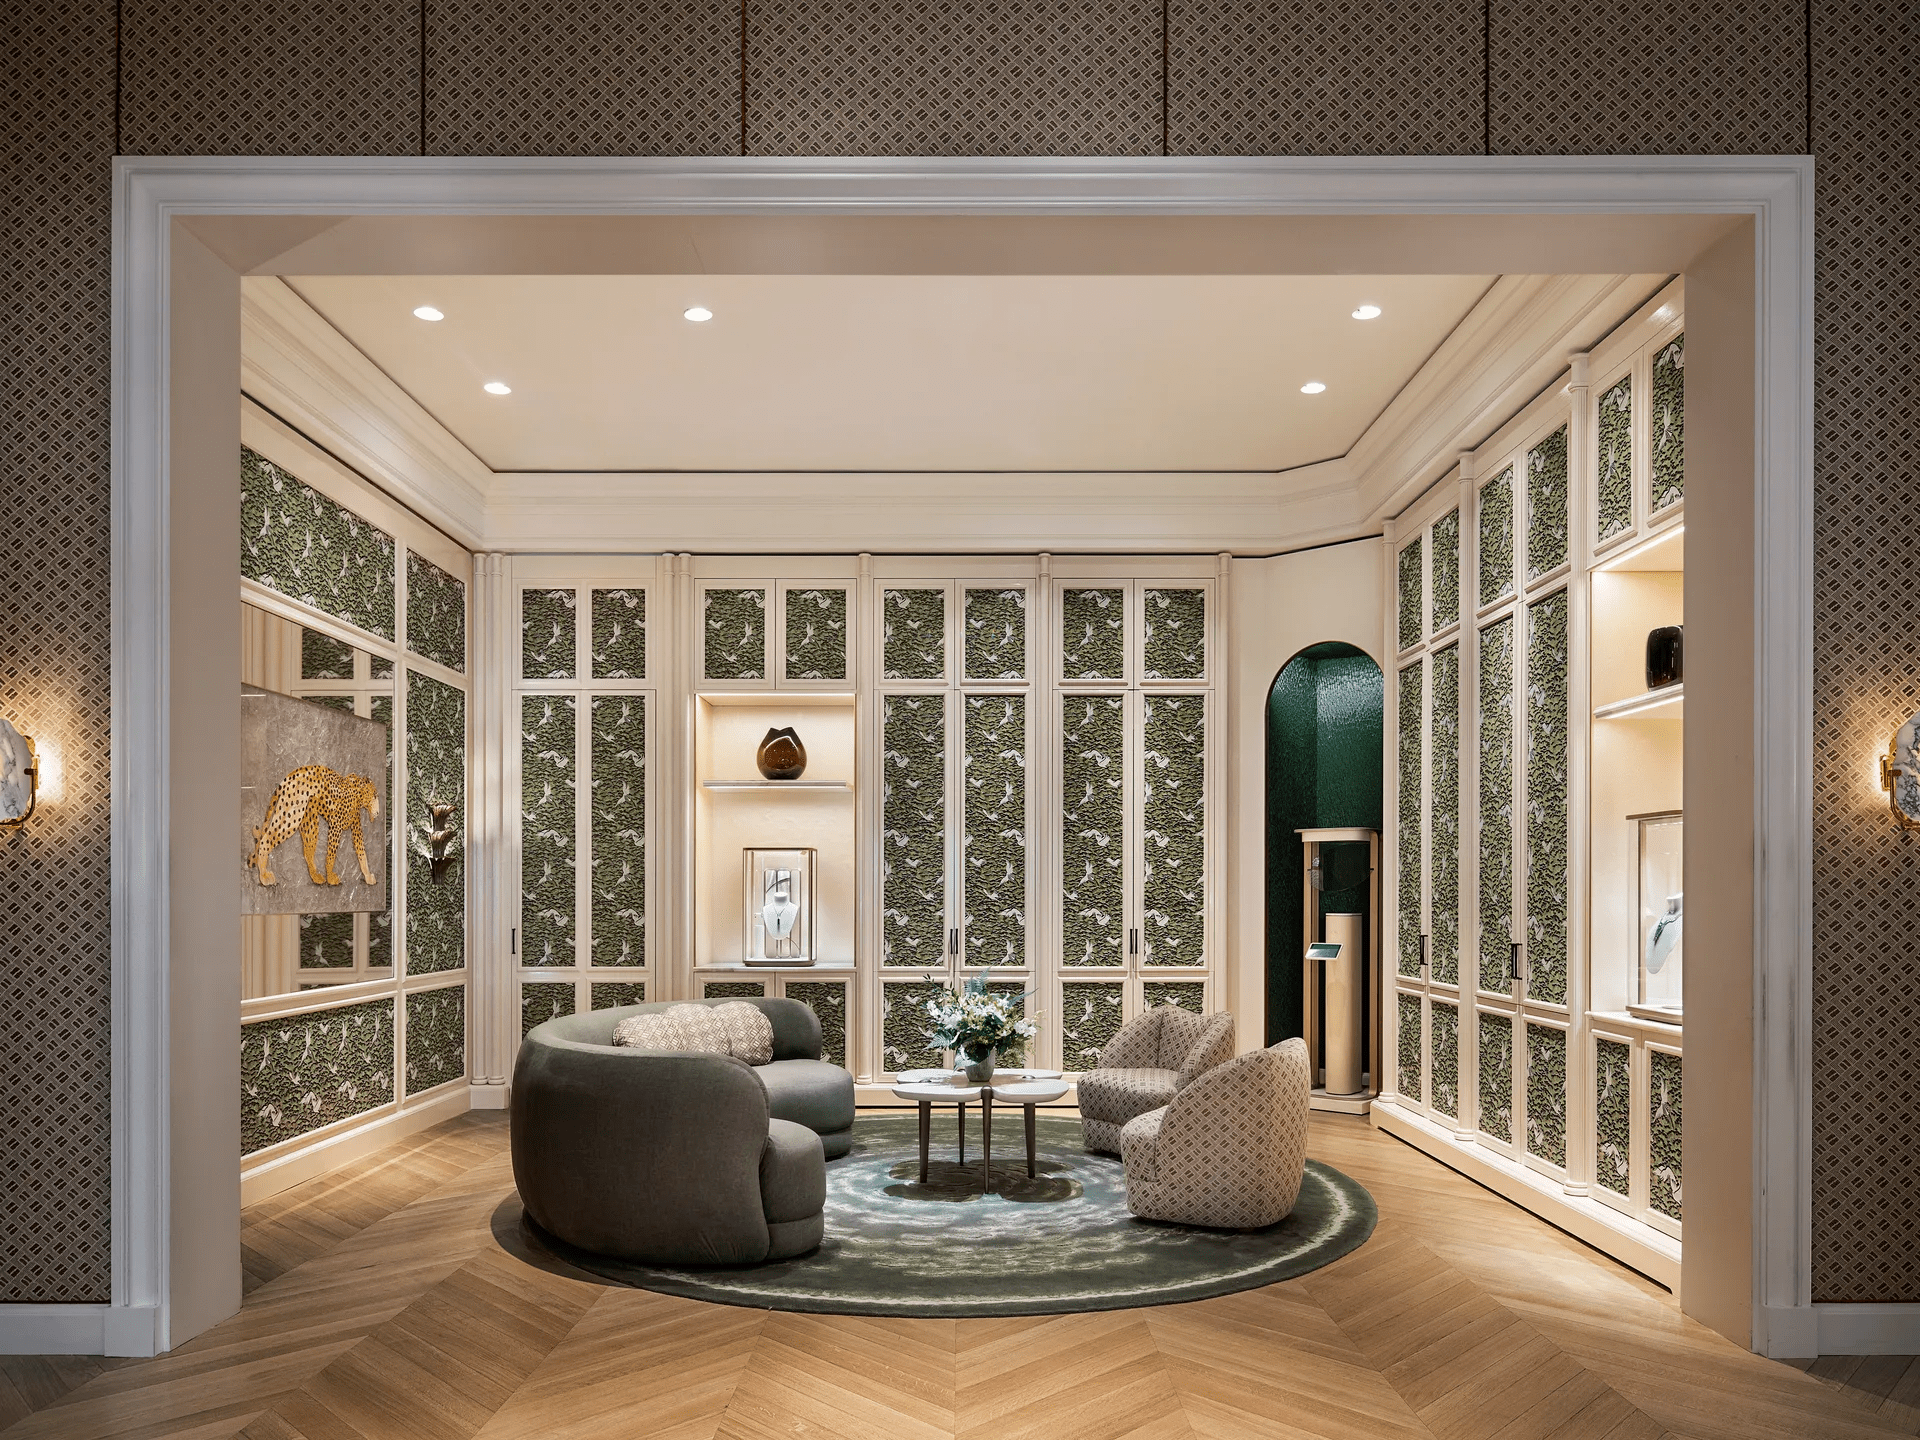 Cartier reopens its Fifth Avenue store